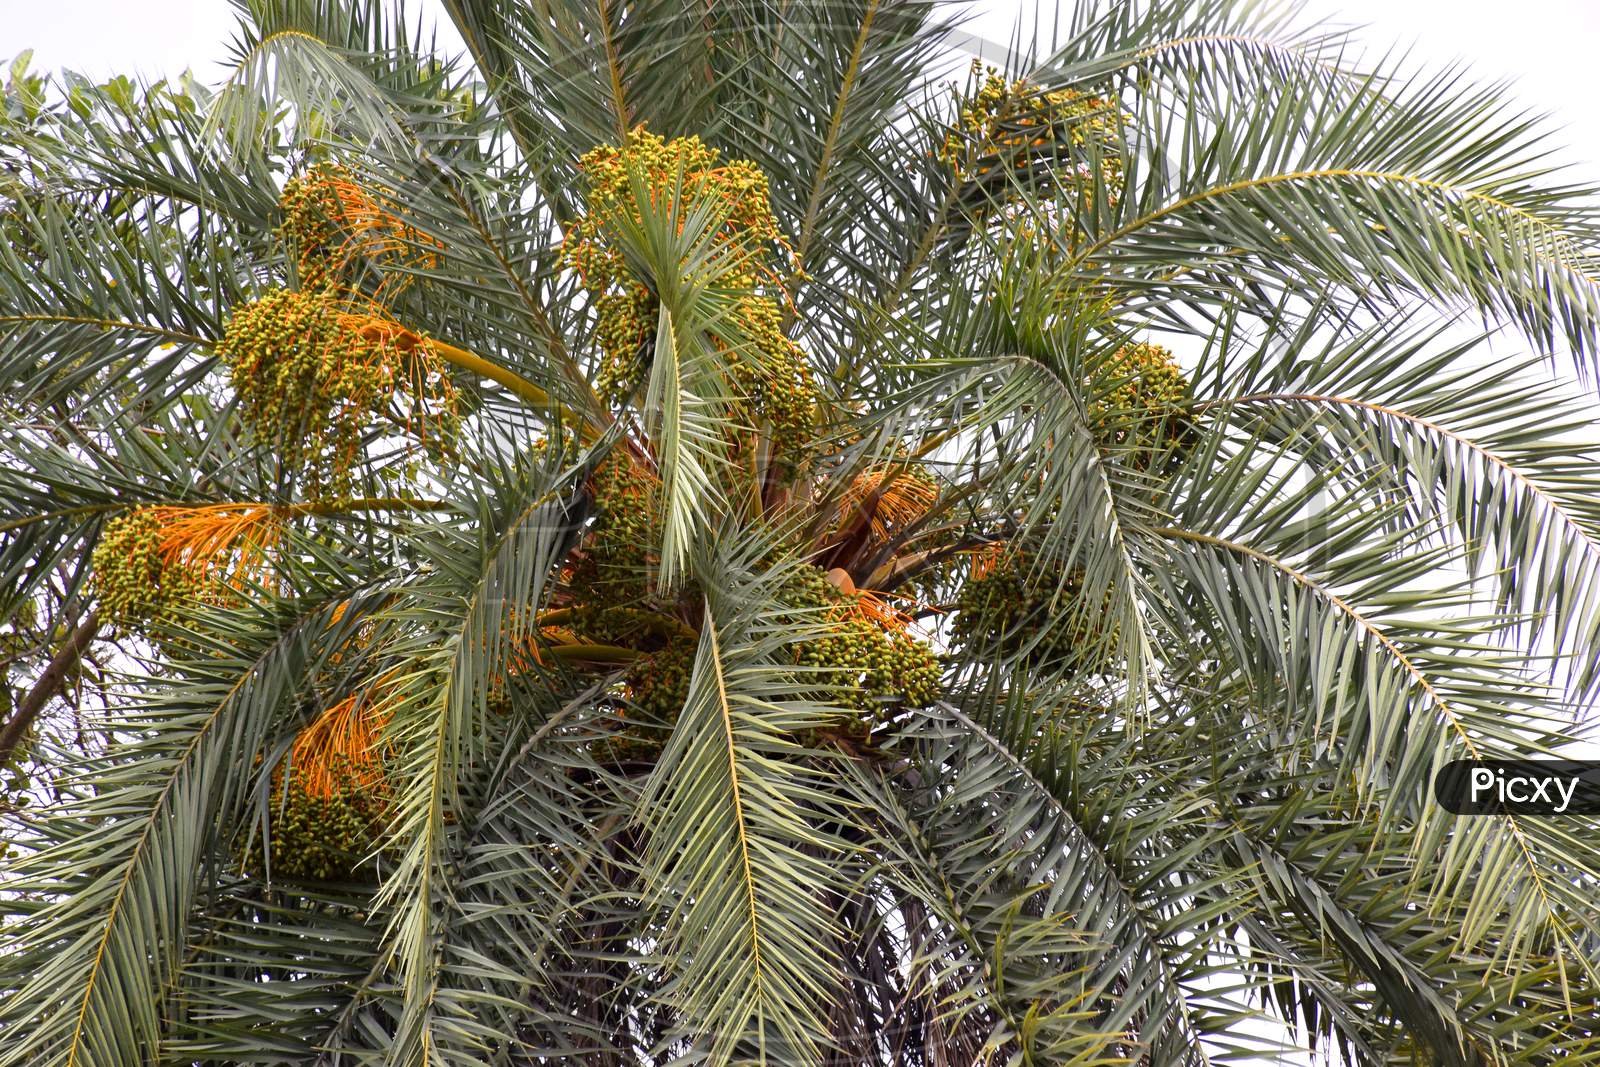 The Top Part Of The Palm Tree And The Palm Flakes Planted In It